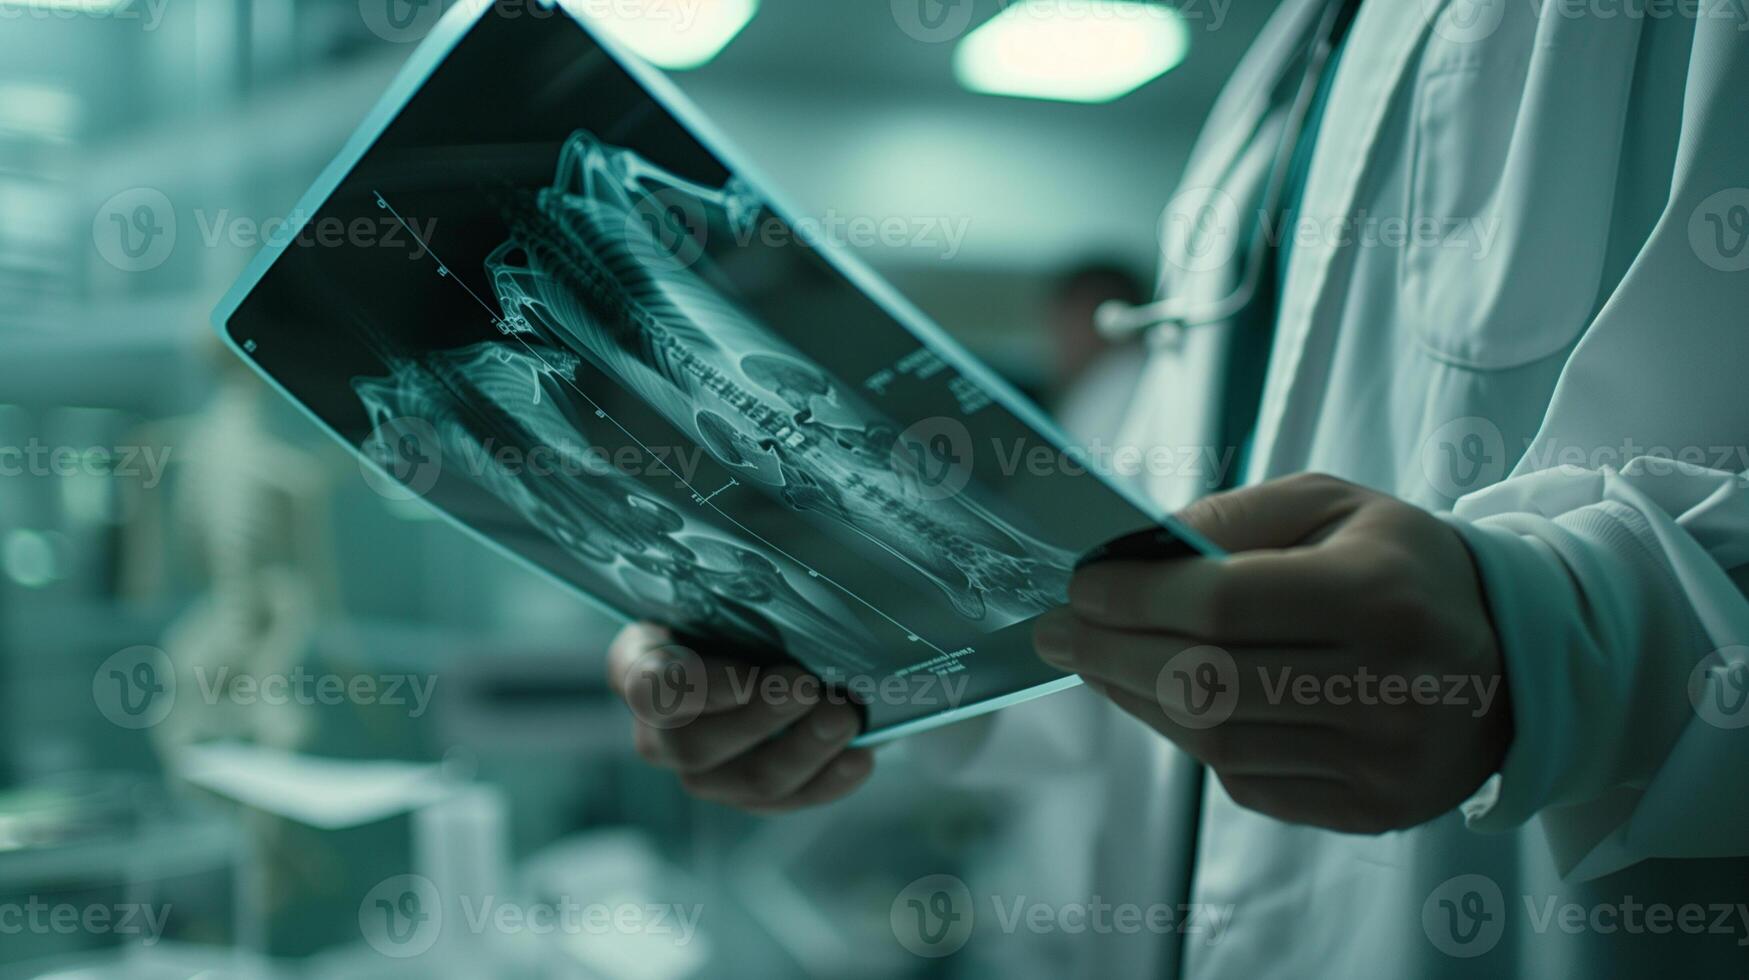 A doctor is holding a medical image of a patient's spine. The image is in blue and white, and the doctor is looking at it intently. Scene is serious and focused photo